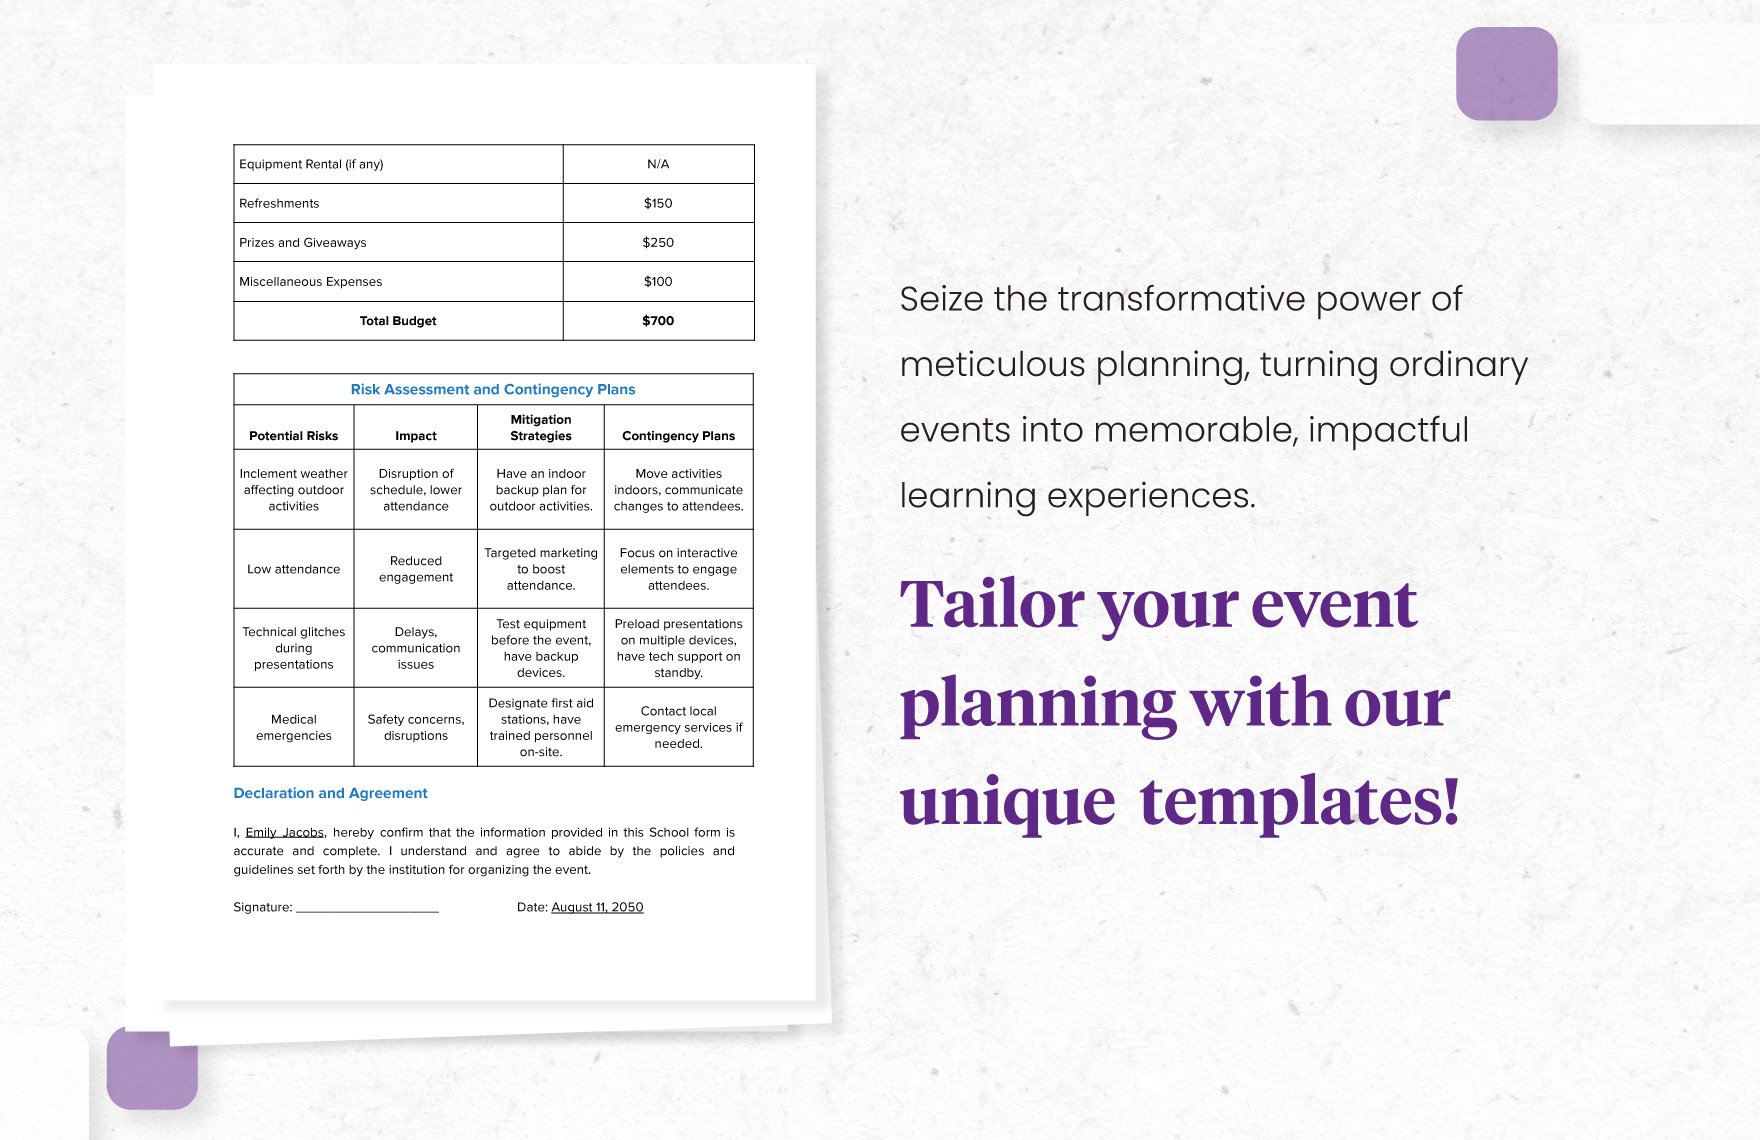 School Event Planning Request Form Template